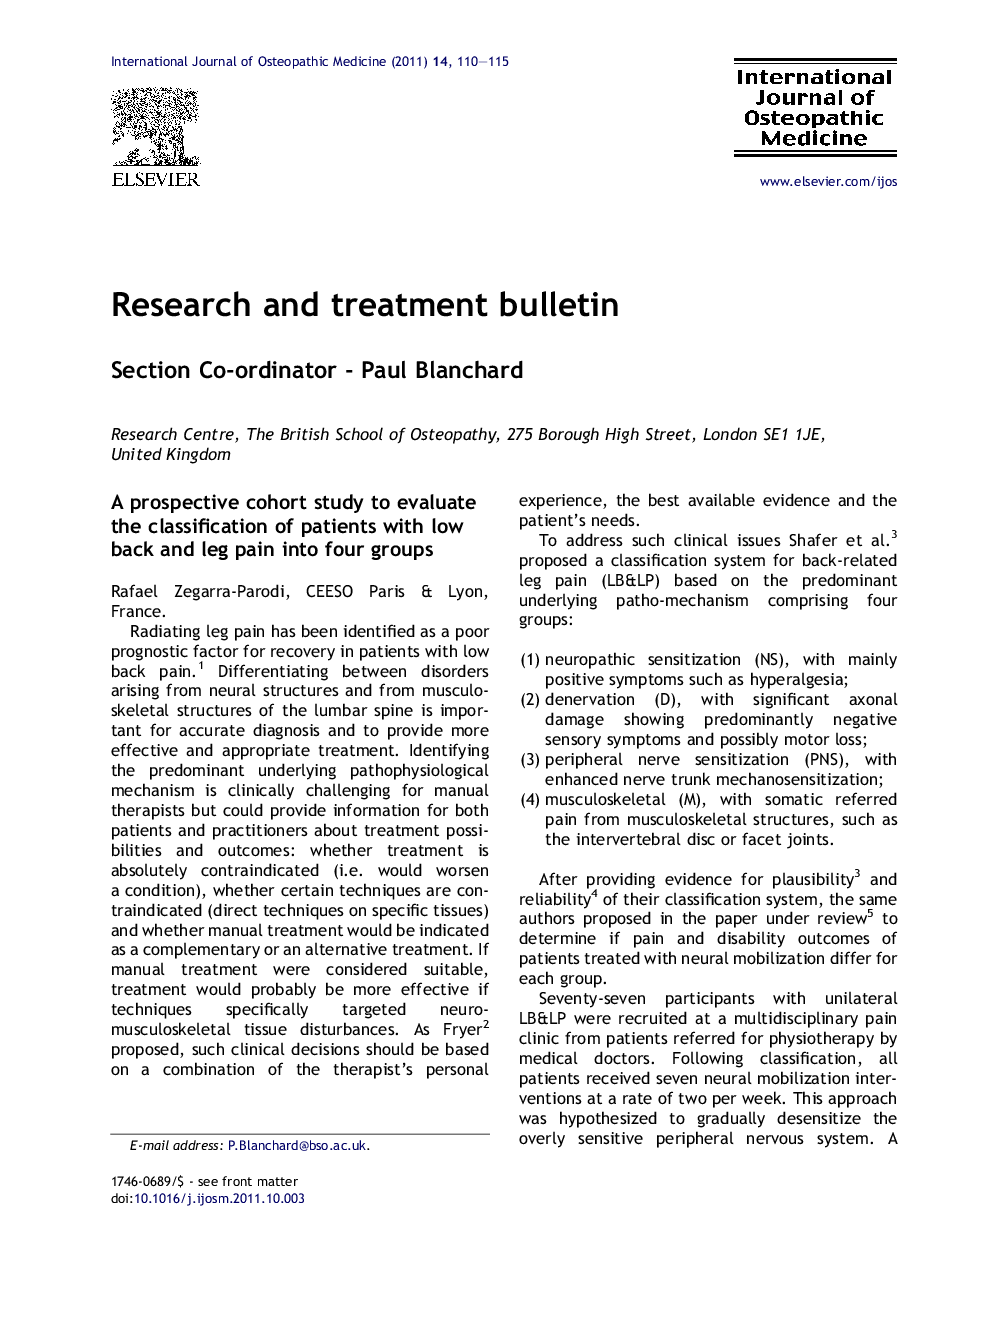 Research and treatment bulletin